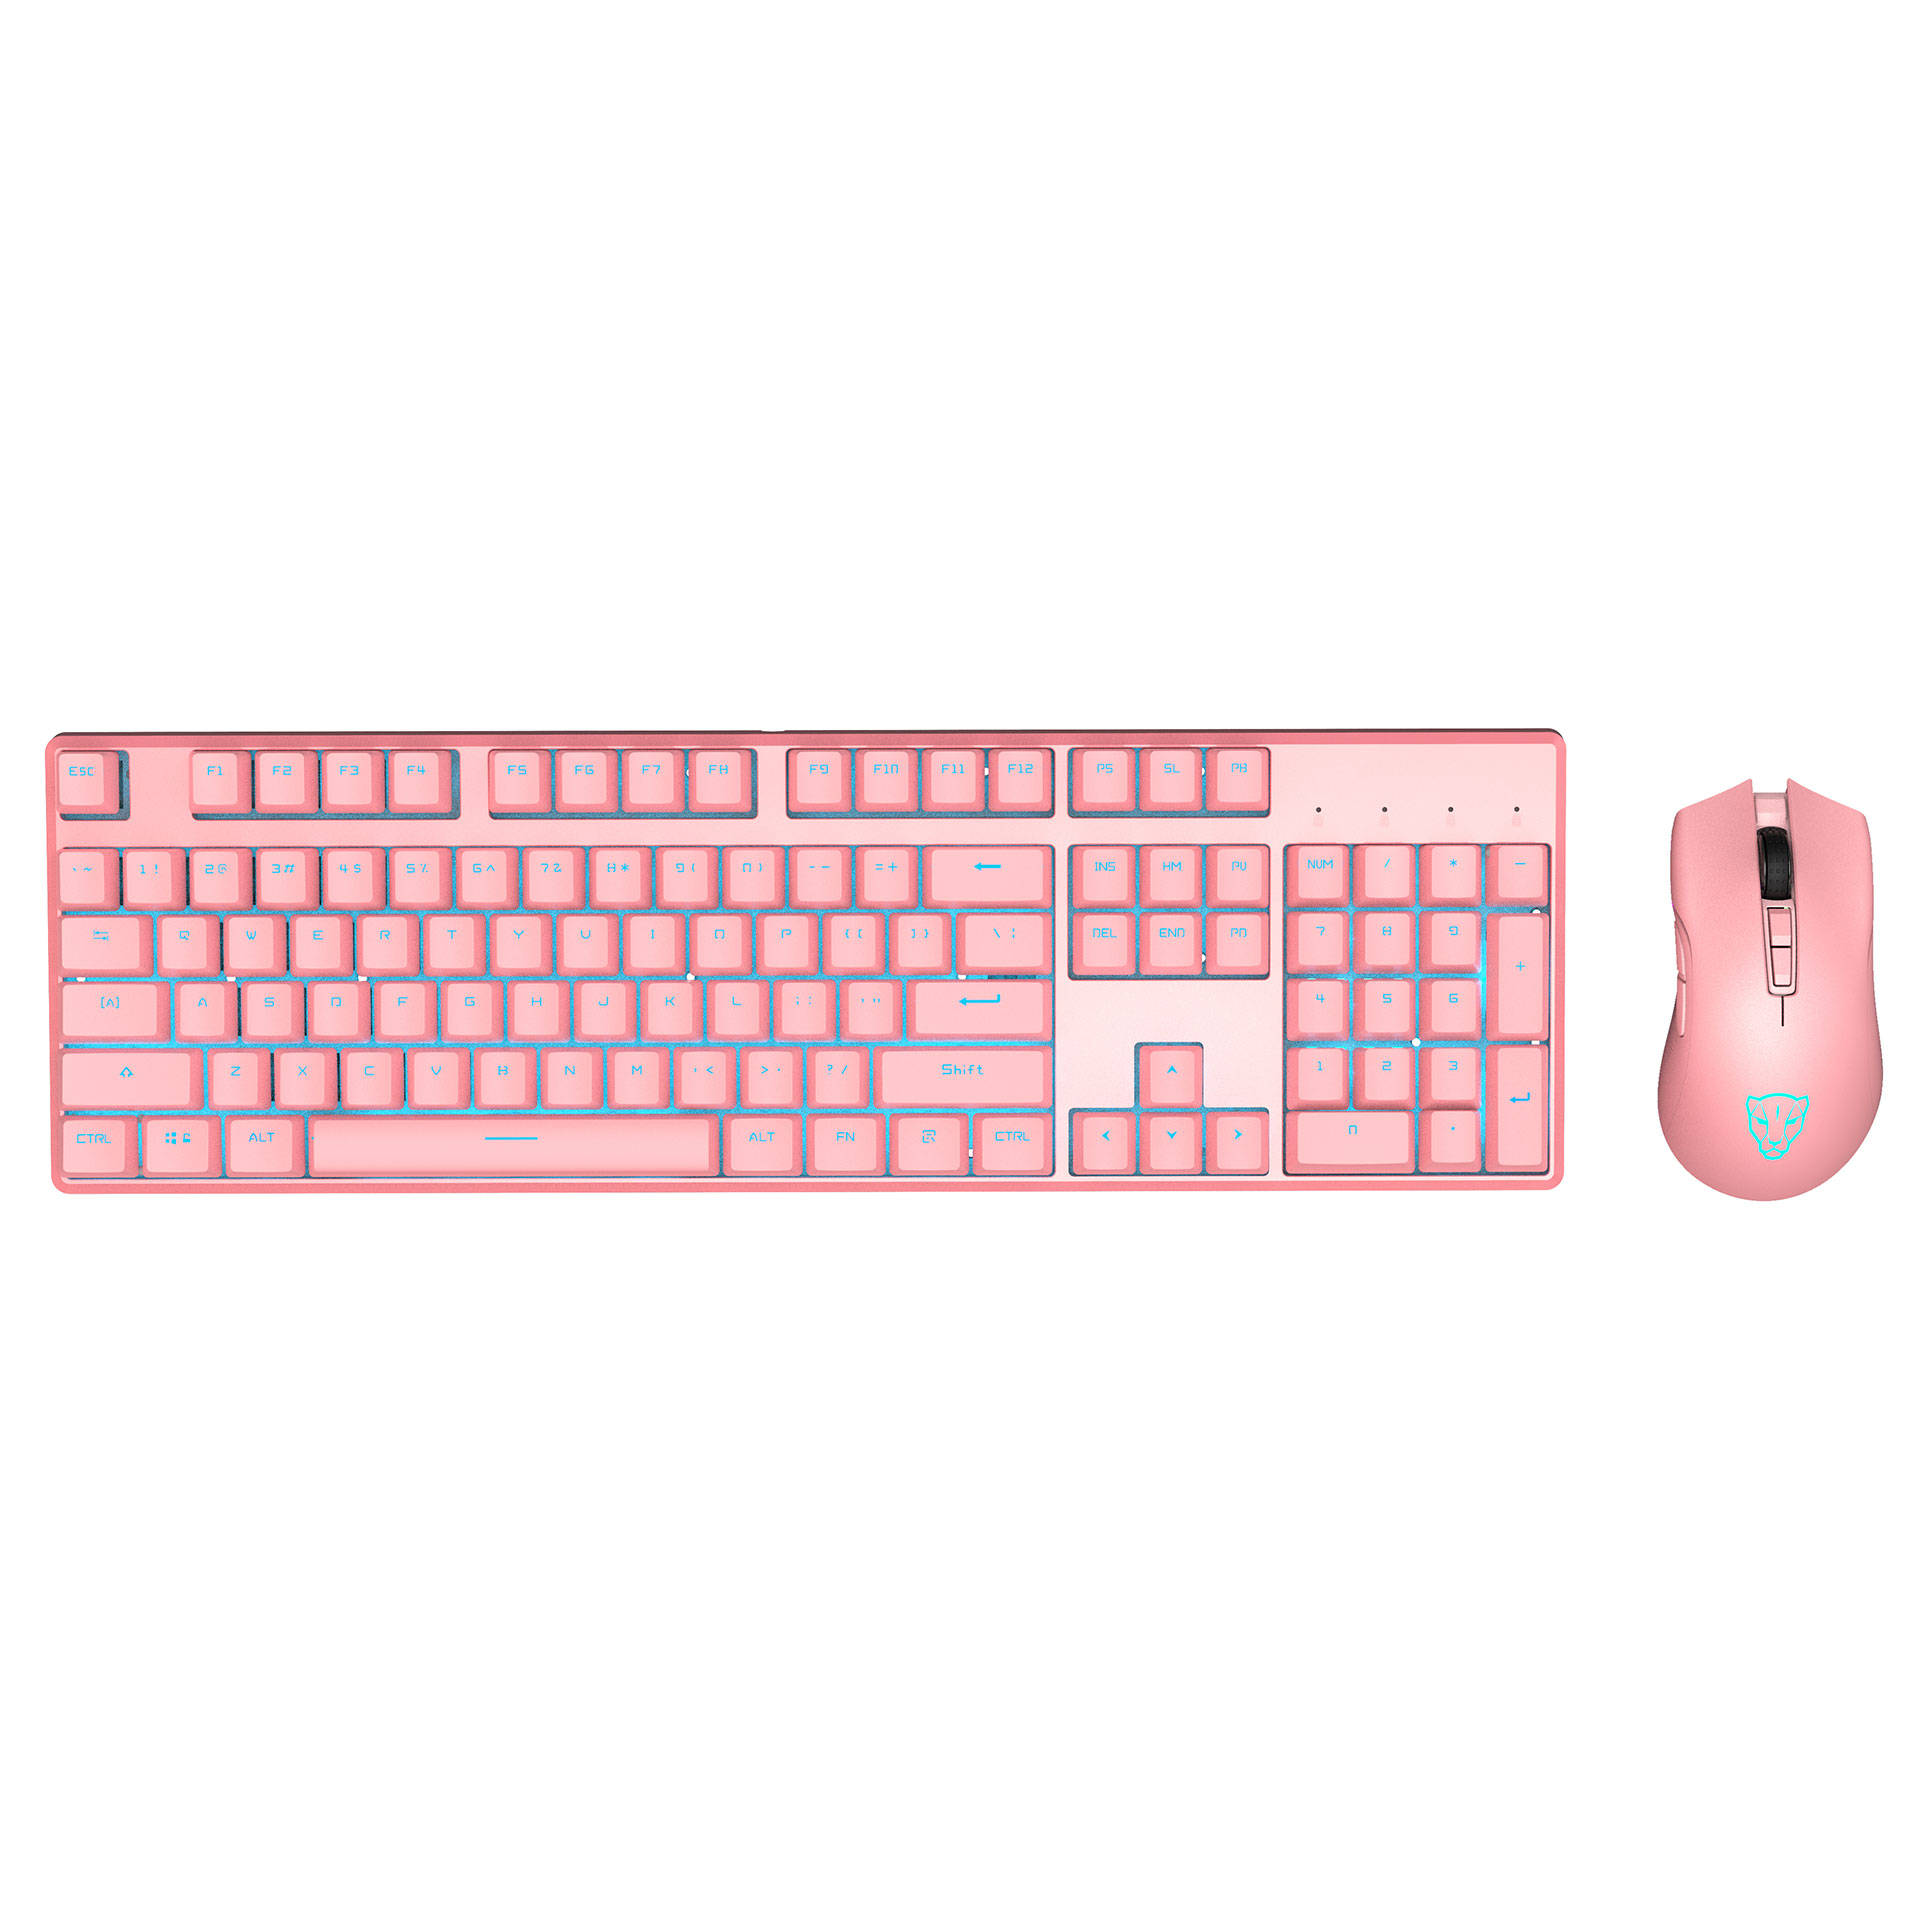 Official Motospeed CK700 Zeus Optical switch, Ice blue backlit Keyboard Mouse Combo-Pink color(Waterproof IP68)